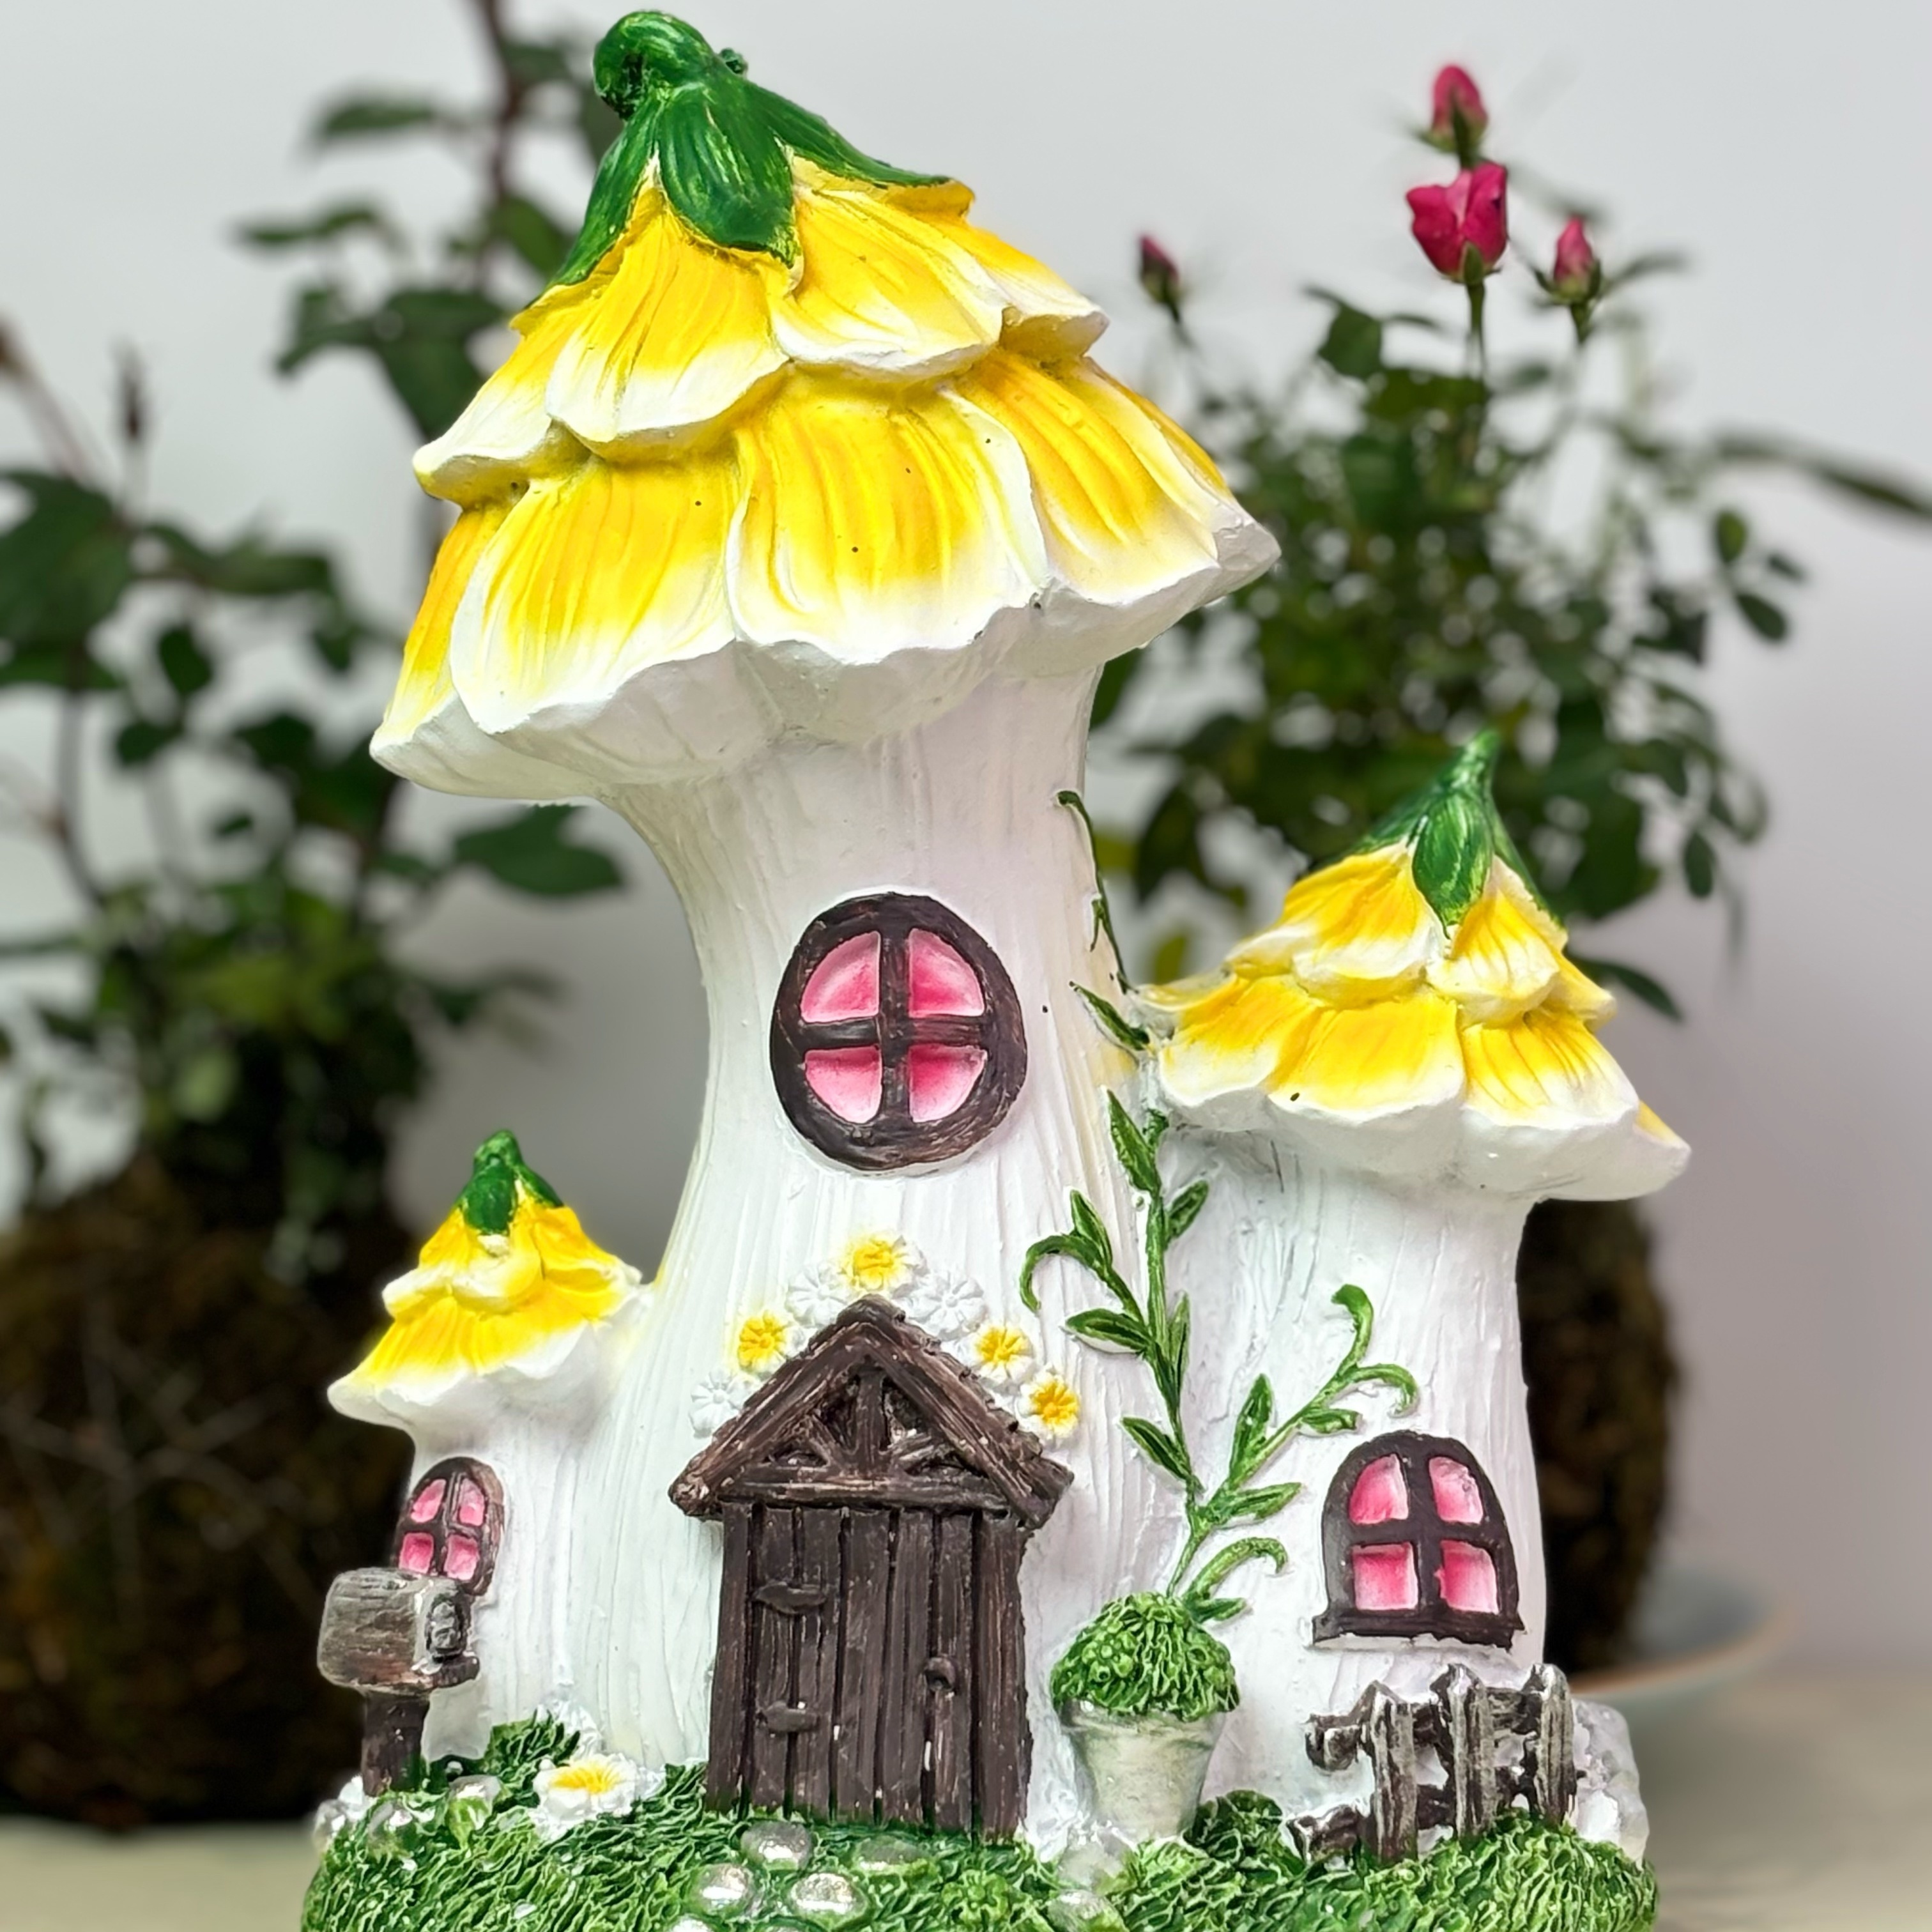 

1pc Resin Mushroom House Outdoor Garden Decor, Spring Home Accent, Whimsical Resin Fairy House For Yard Decoration